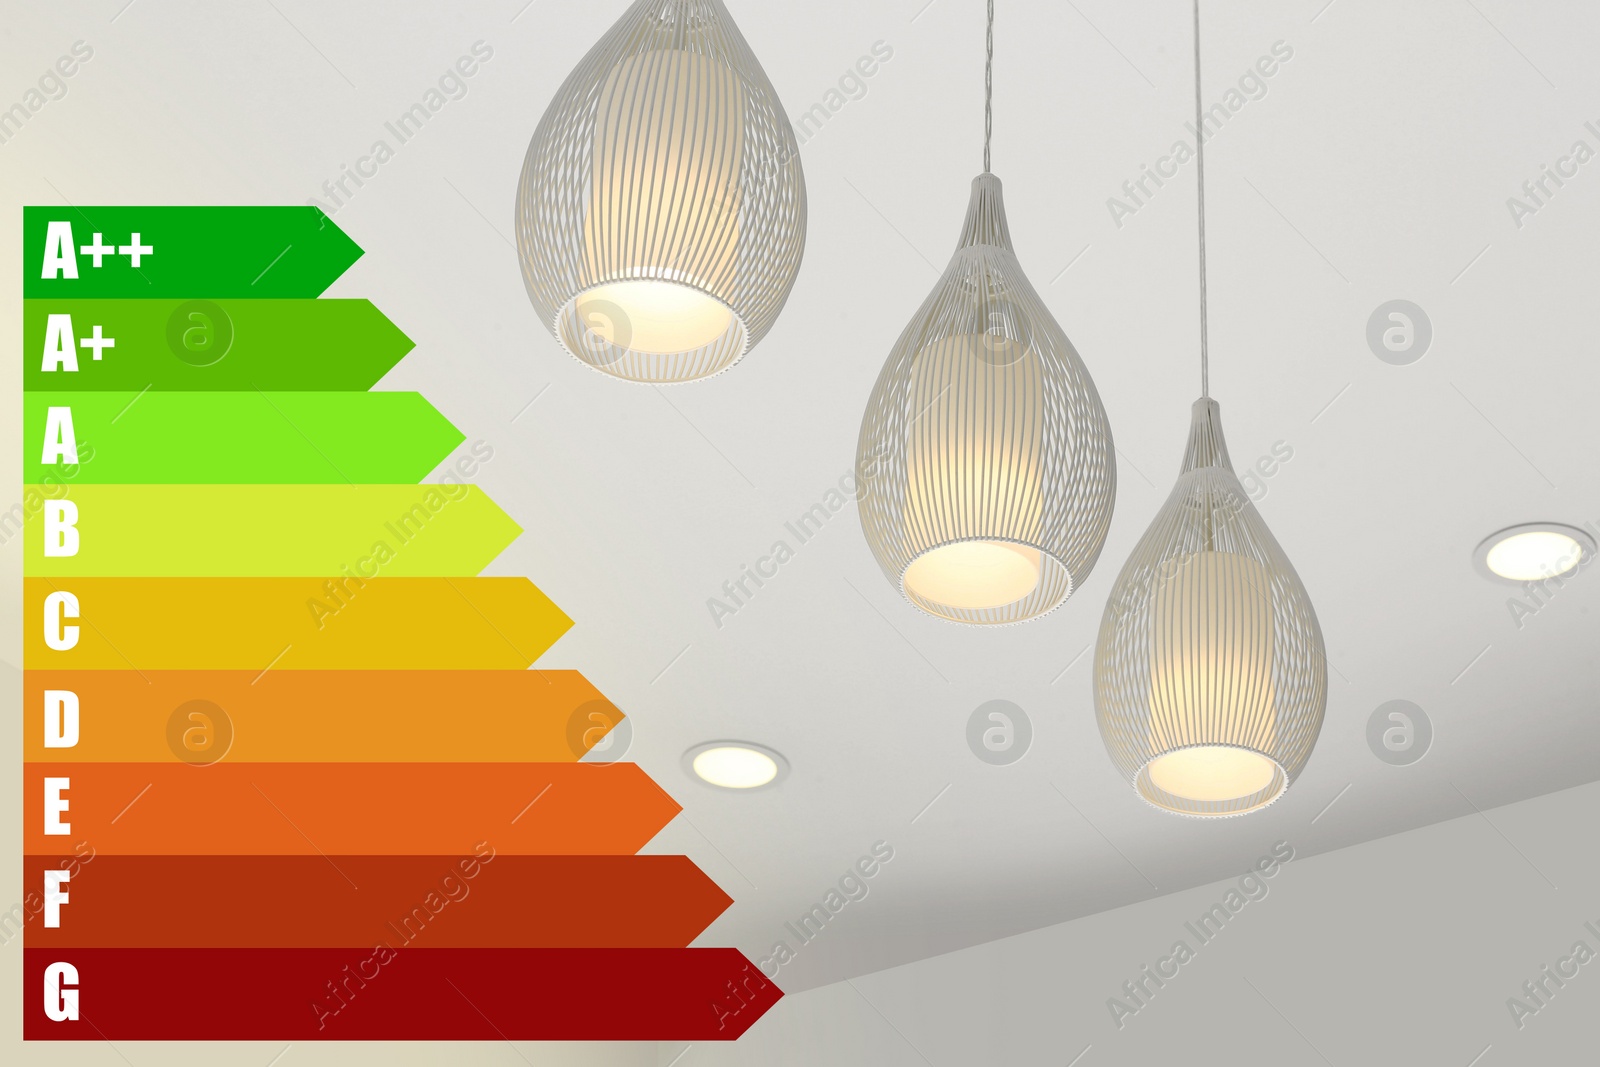 Image of Energy efficiency rating label and pendant lamp on ceiling indoors